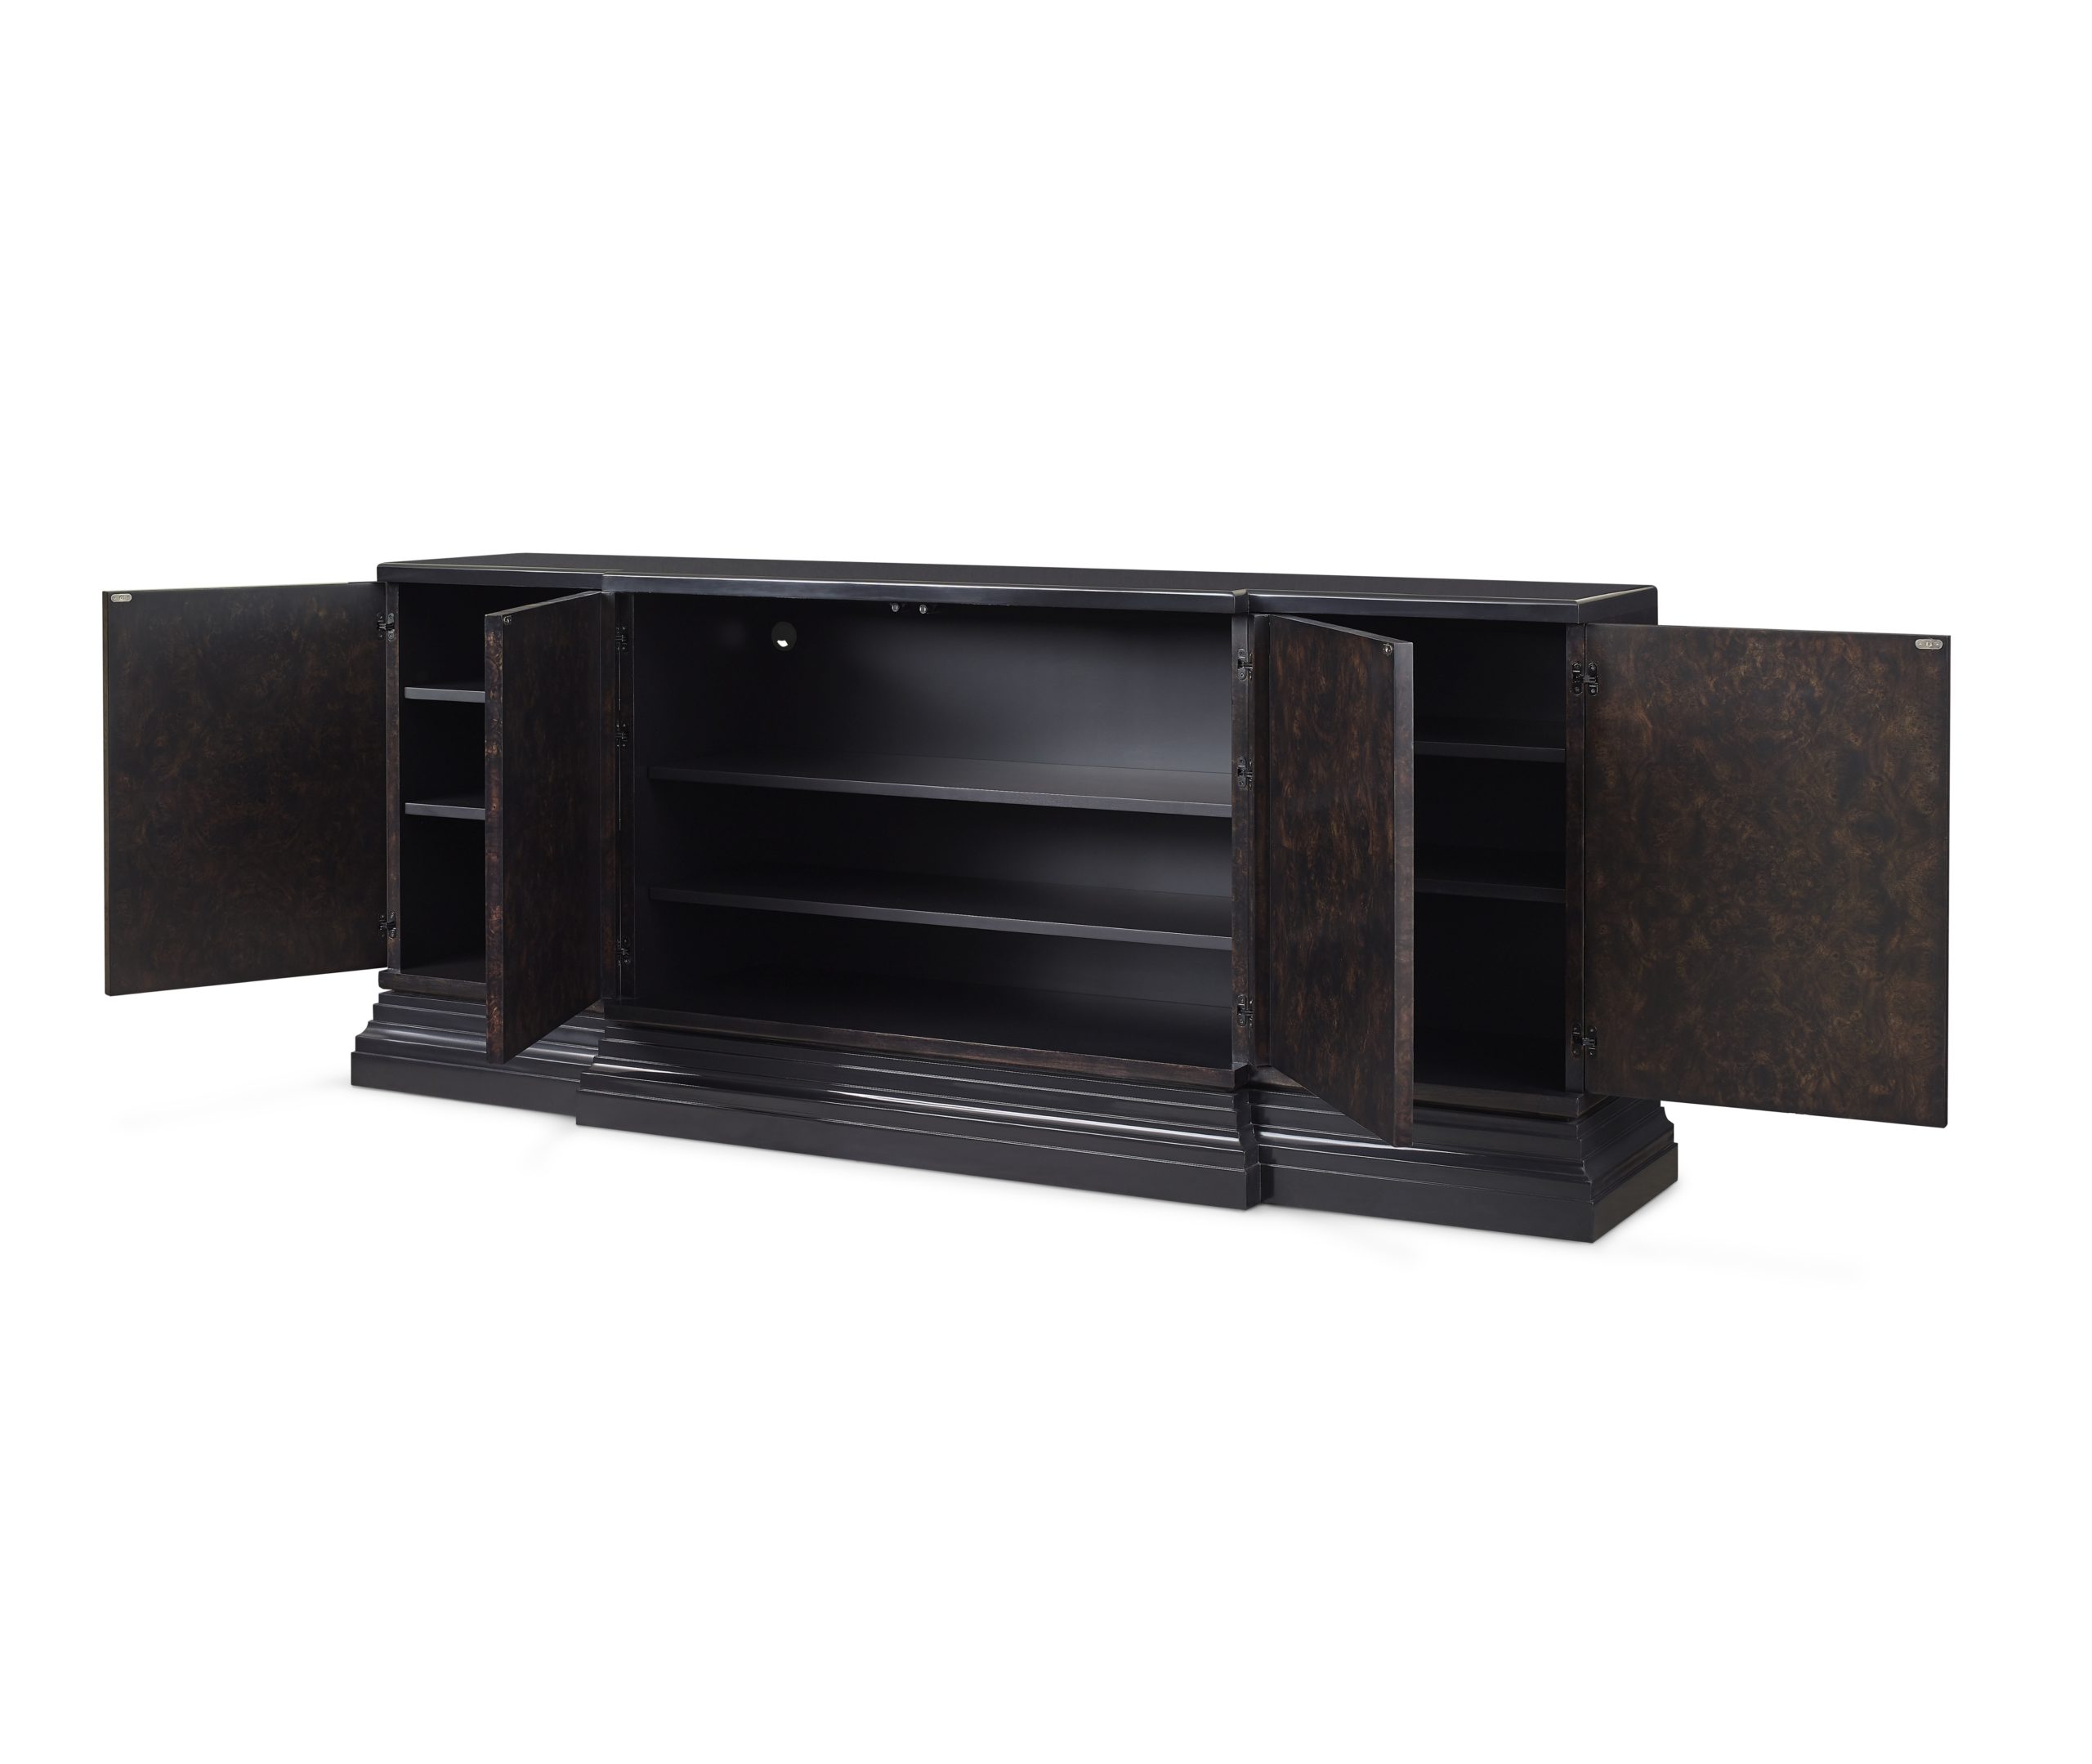 Baker_products_WNWN_maximus_credenza_BAA3030_OPEN-scaled-1